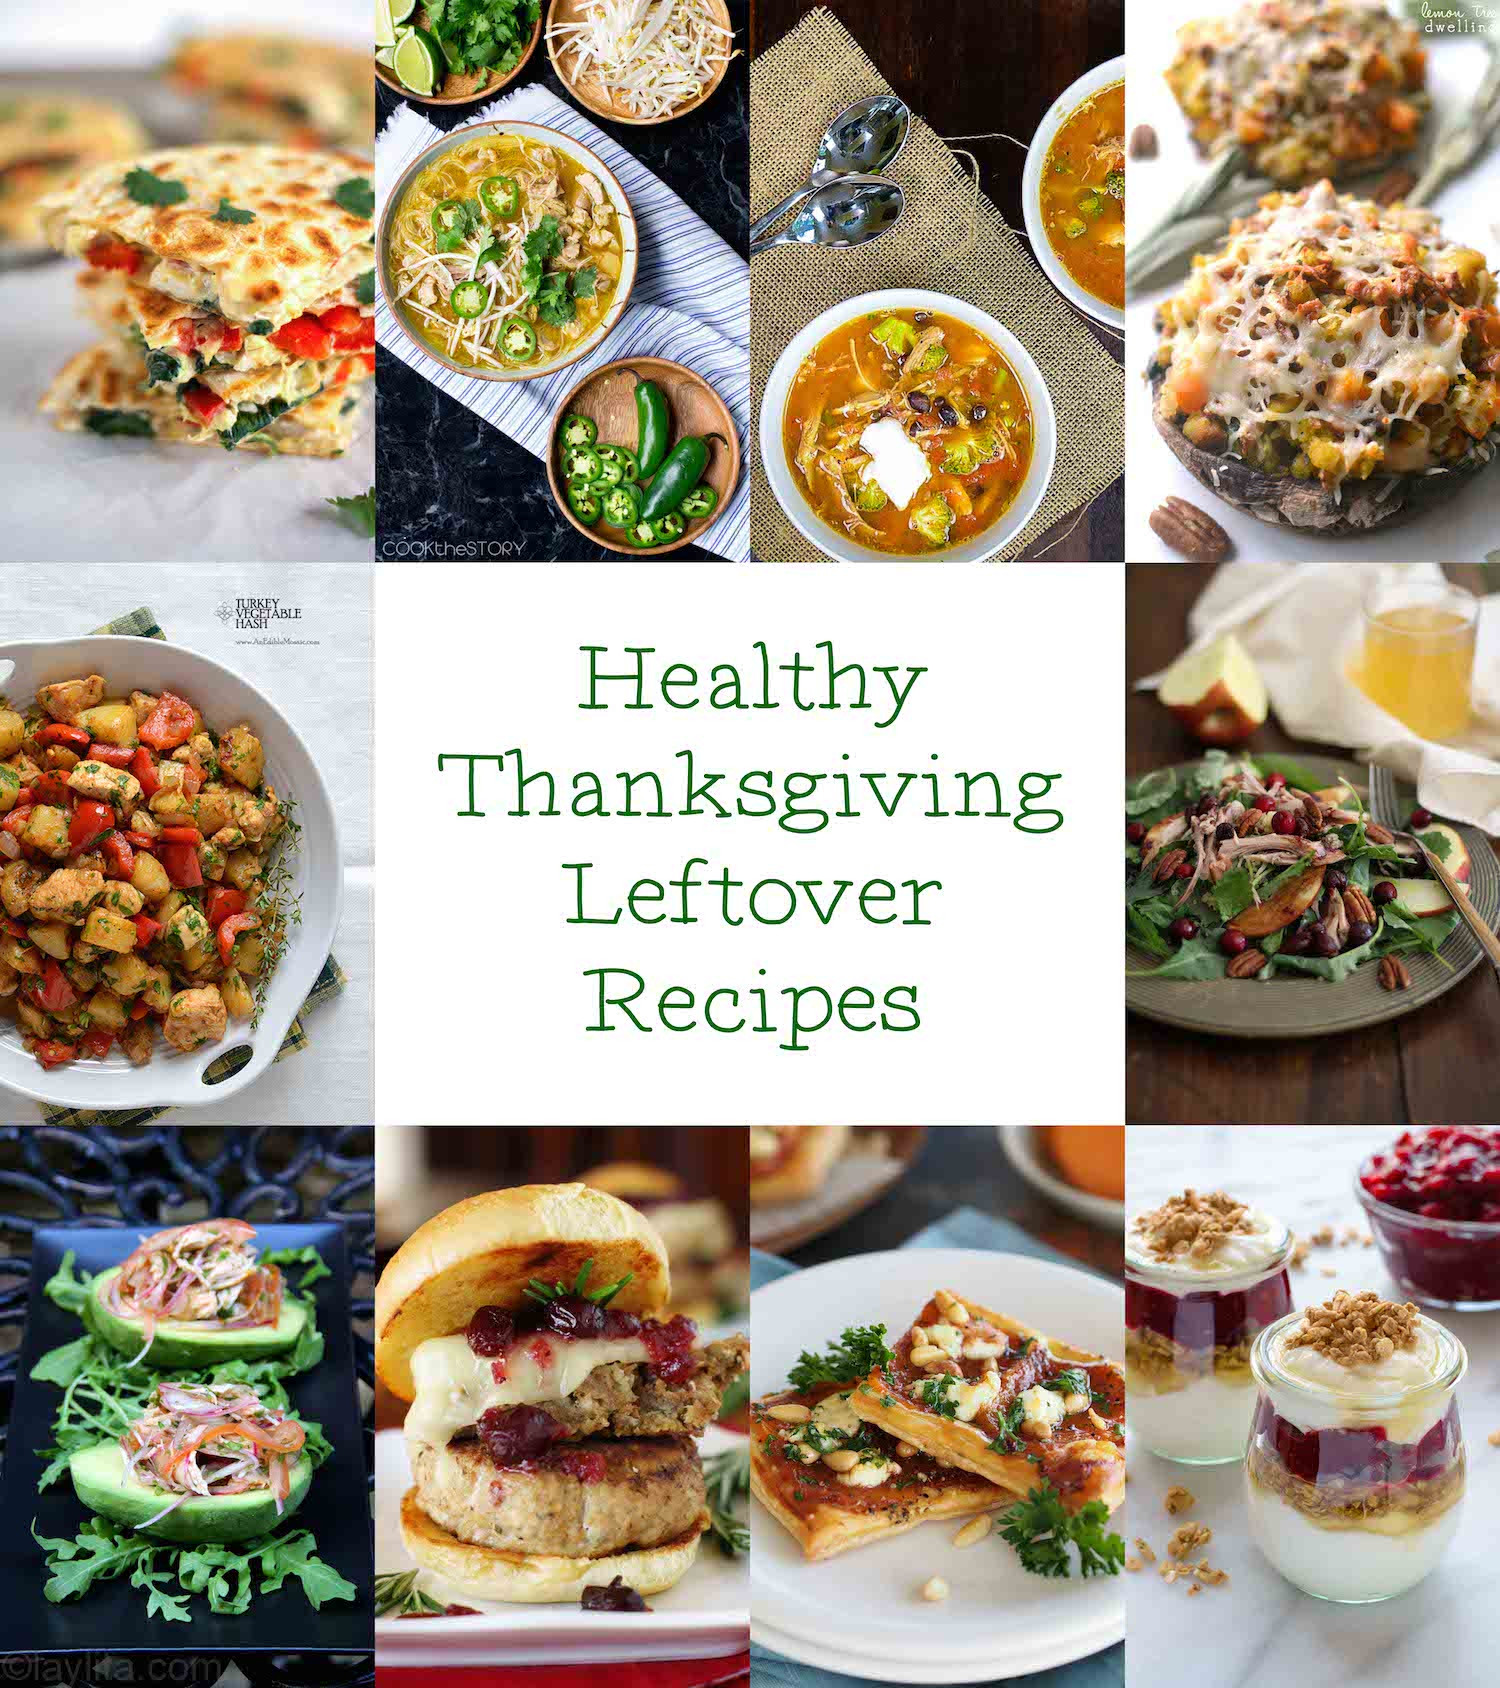 Thanksgiving Leftovers Recipes
 20 Healthy Thanksgiving Leftover Recipes A Healthy Life